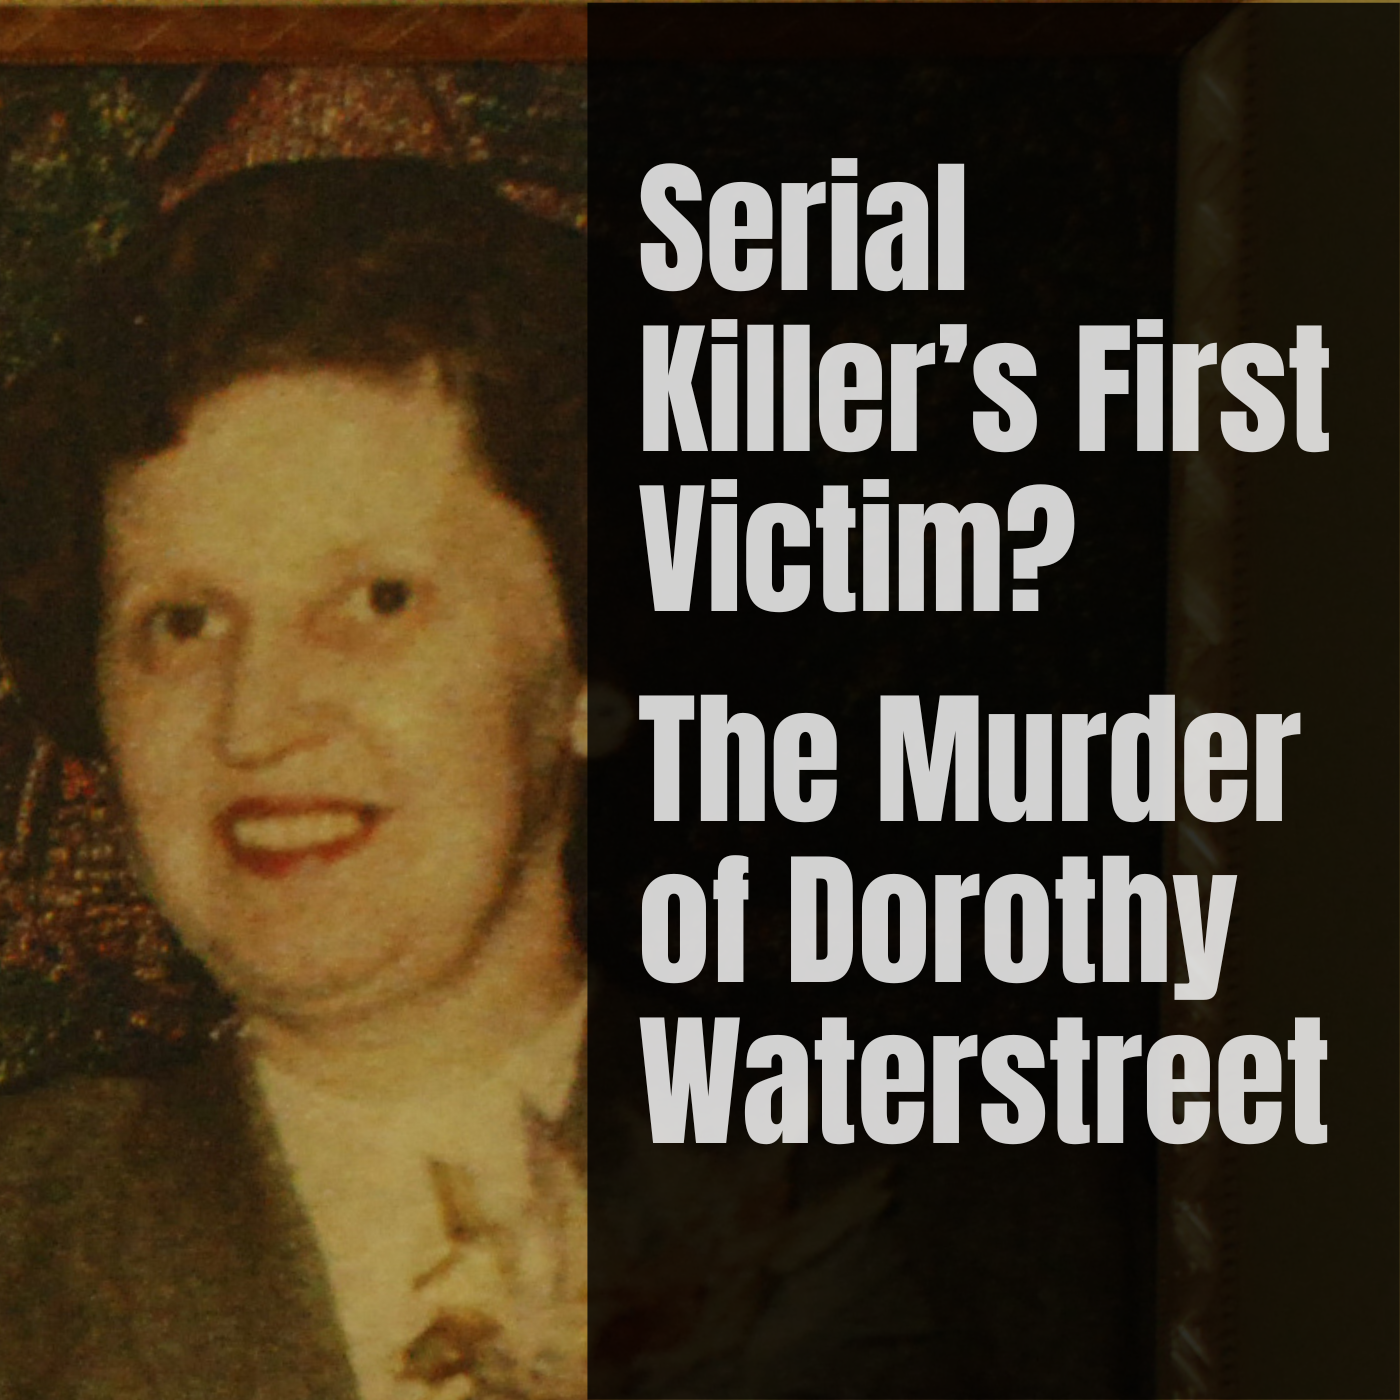 Serial Killer’s First Victim? The Murder of Dorothy Waterstreet